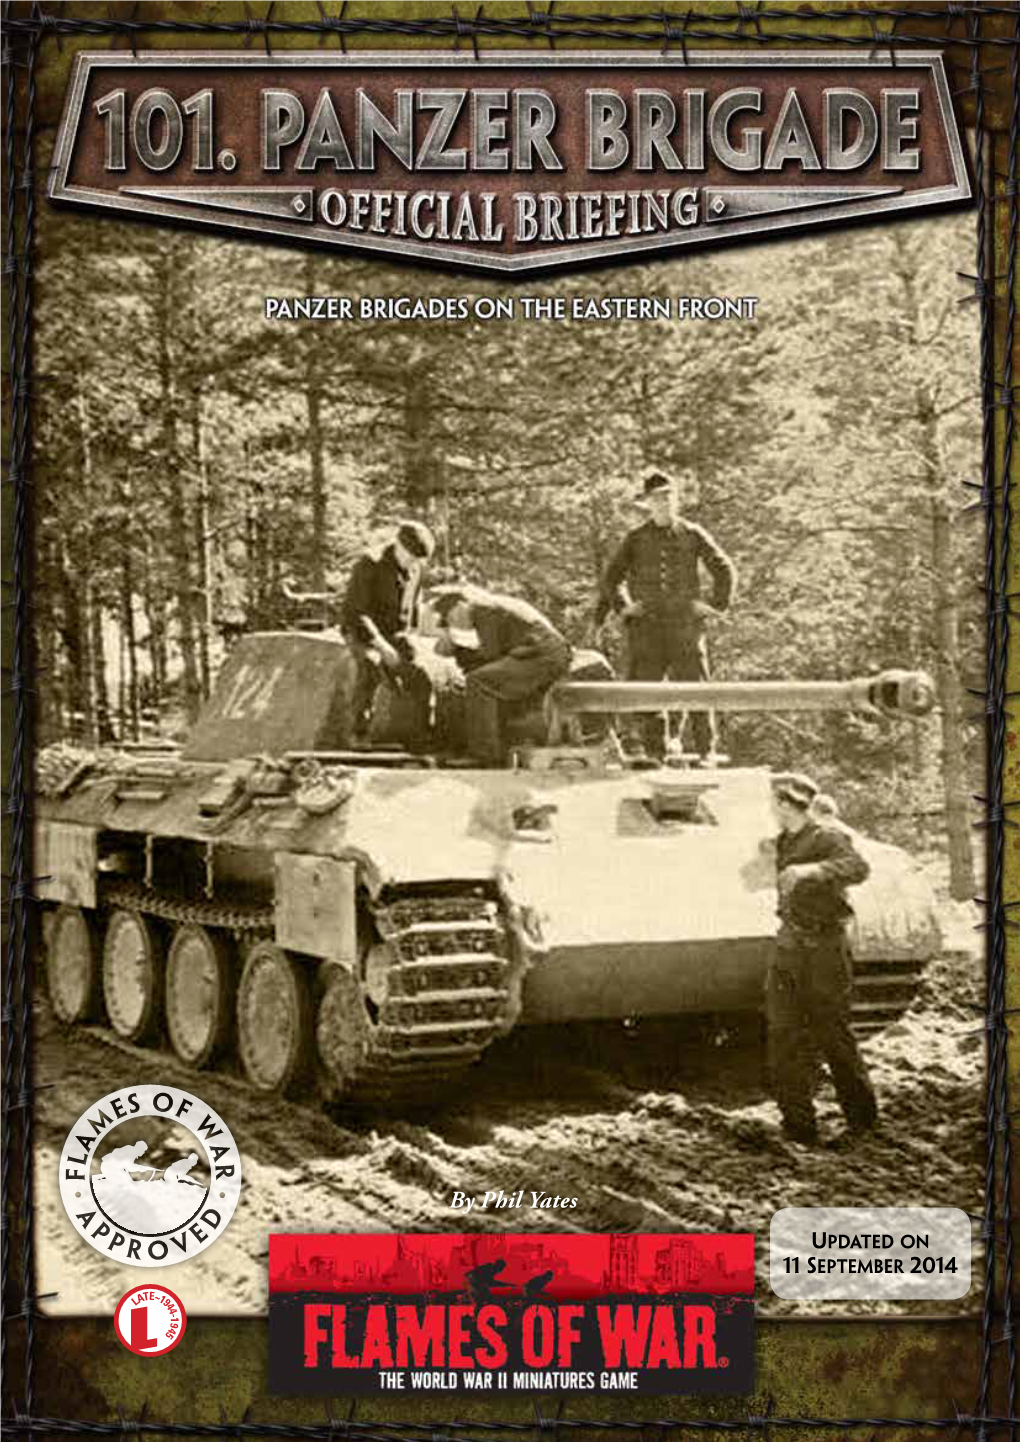 PANZER BRIGADES on the EASTERN FRONT by Phil Yates